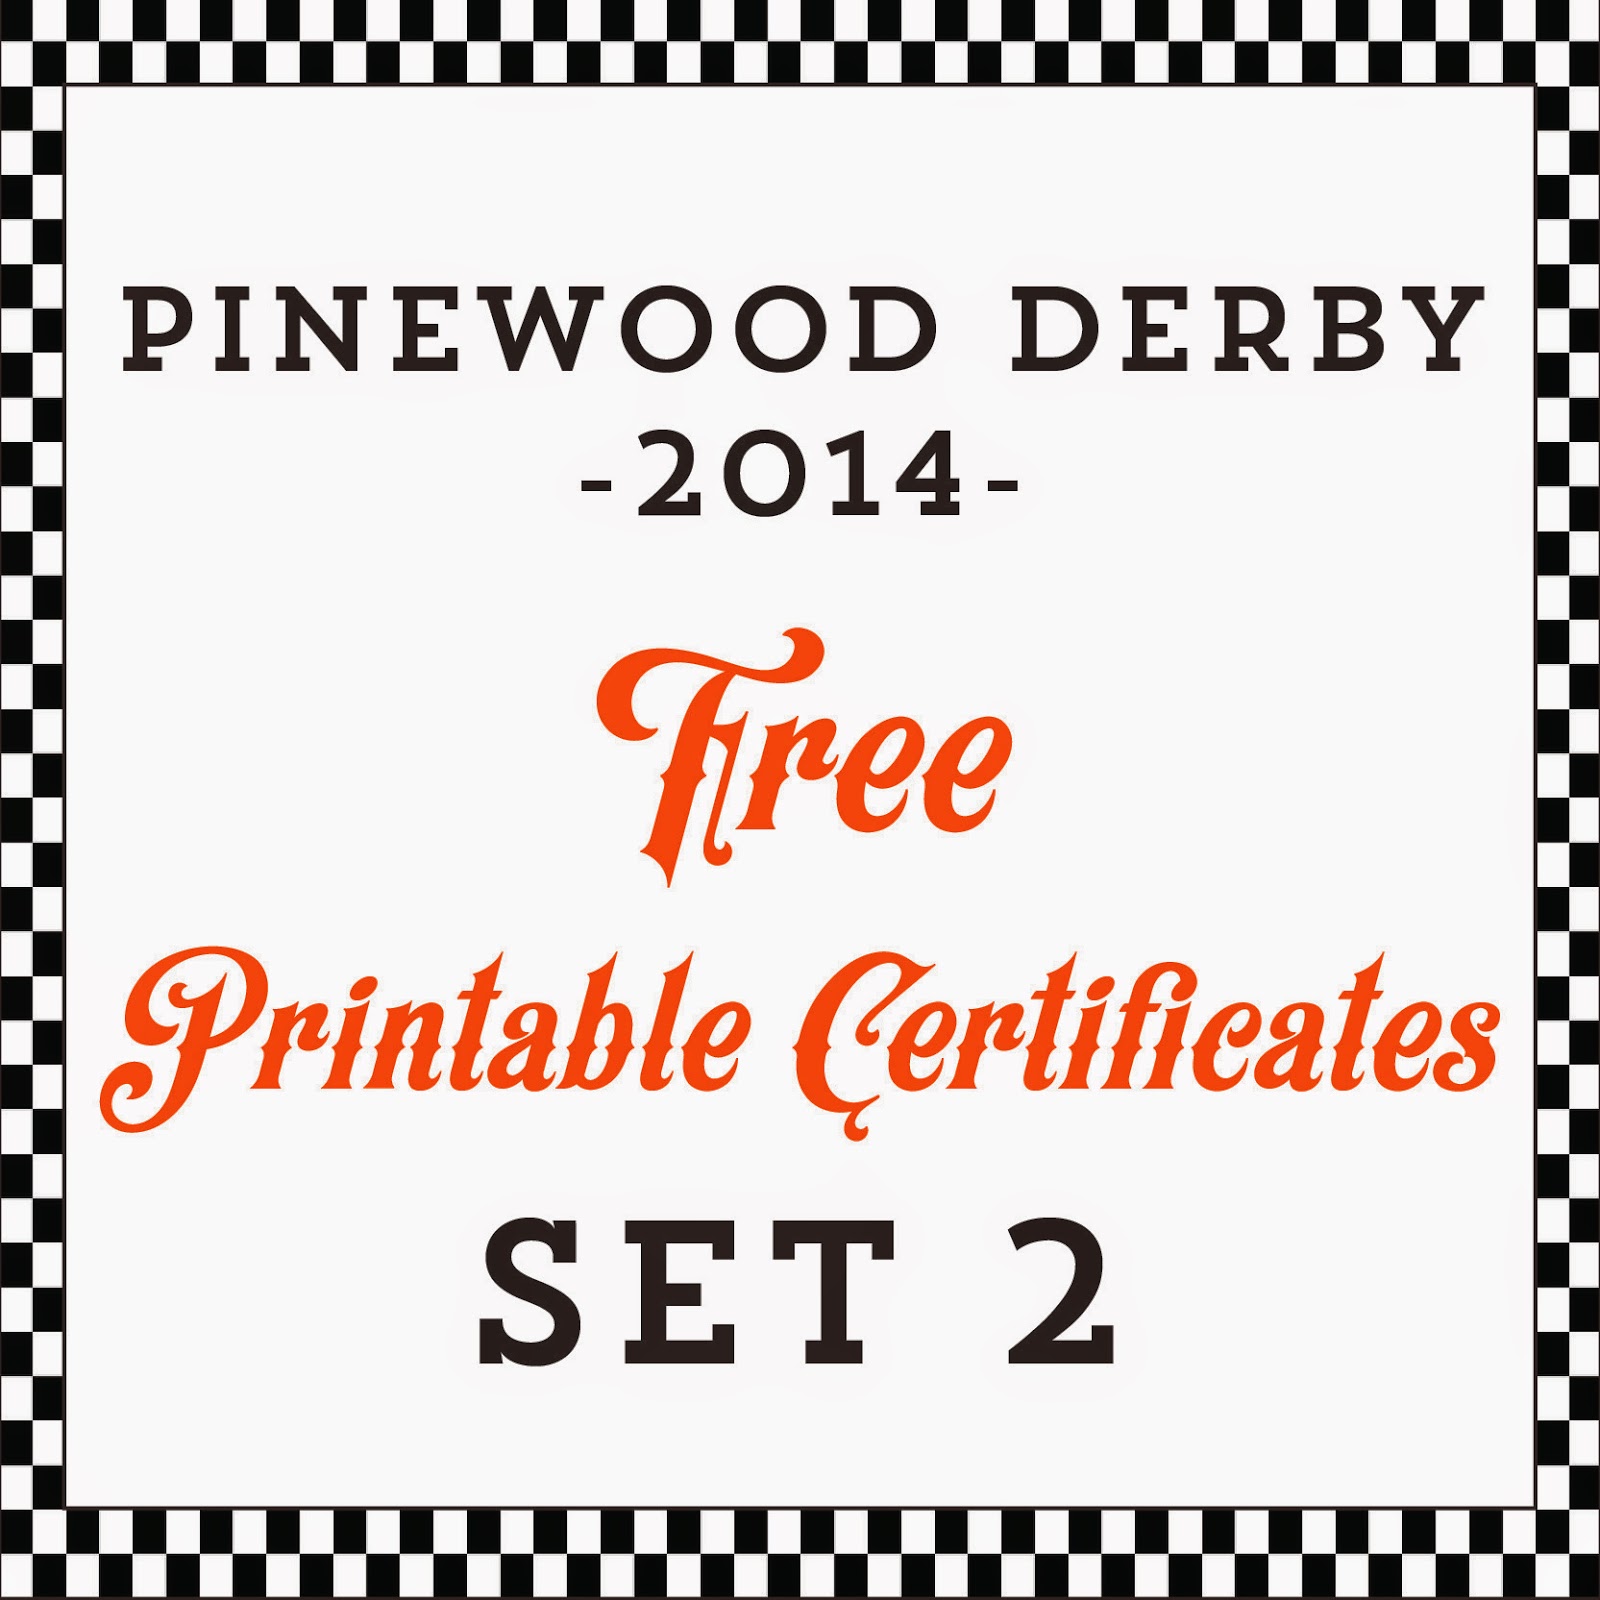 Hot Commodity Home Decor: Free Printable Pinewood Derby Awards